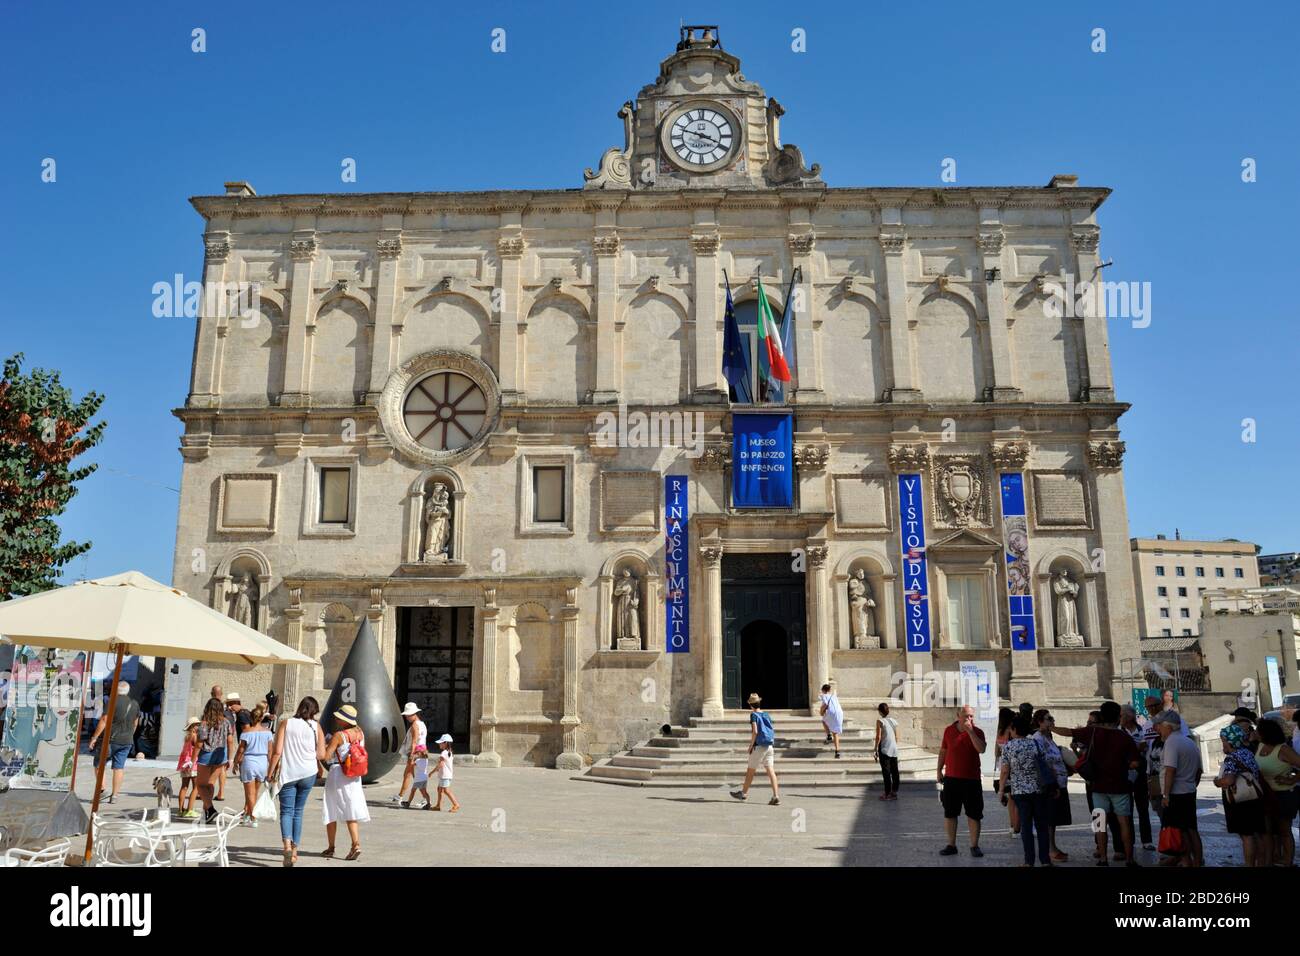 italy, basilicata, matera, palazzo lanfranchi, museo nazionale d'arte medievale e moderna, national museum of medieval and modern art Stock Photo